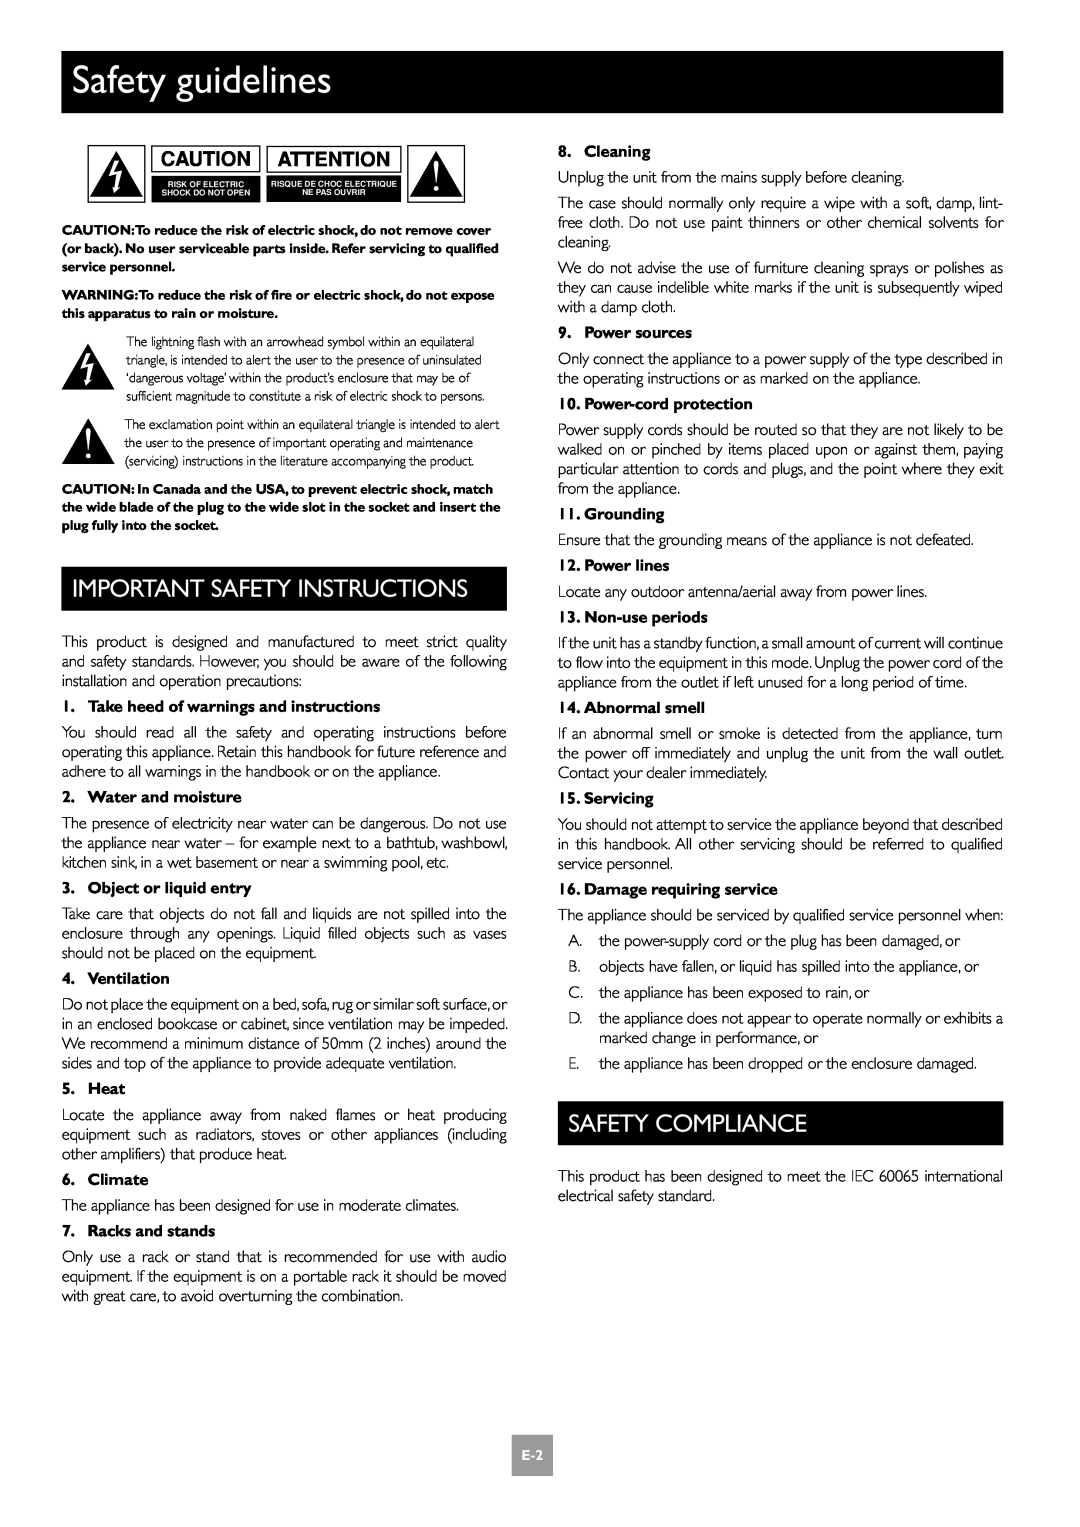 Arcam E-2 manual Safety guidelines, Important Safety Instructions, Safety Compliance 